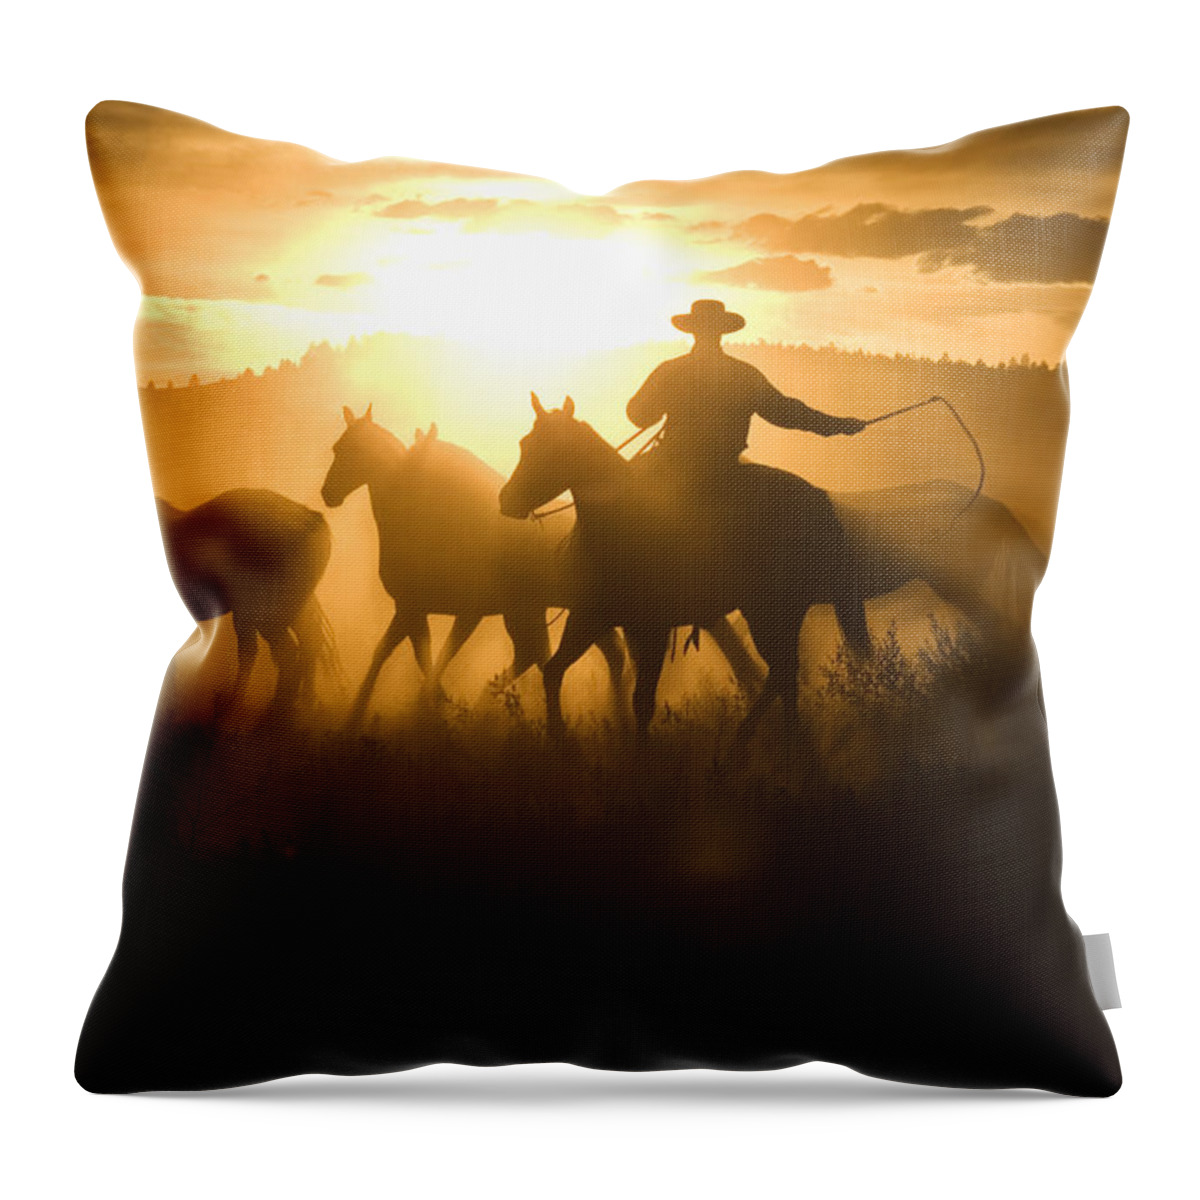 Feb0514 Throw Pillow featuring the photograph Cowboy With Lasso Herding Horses Oregon by Konrad Wothe